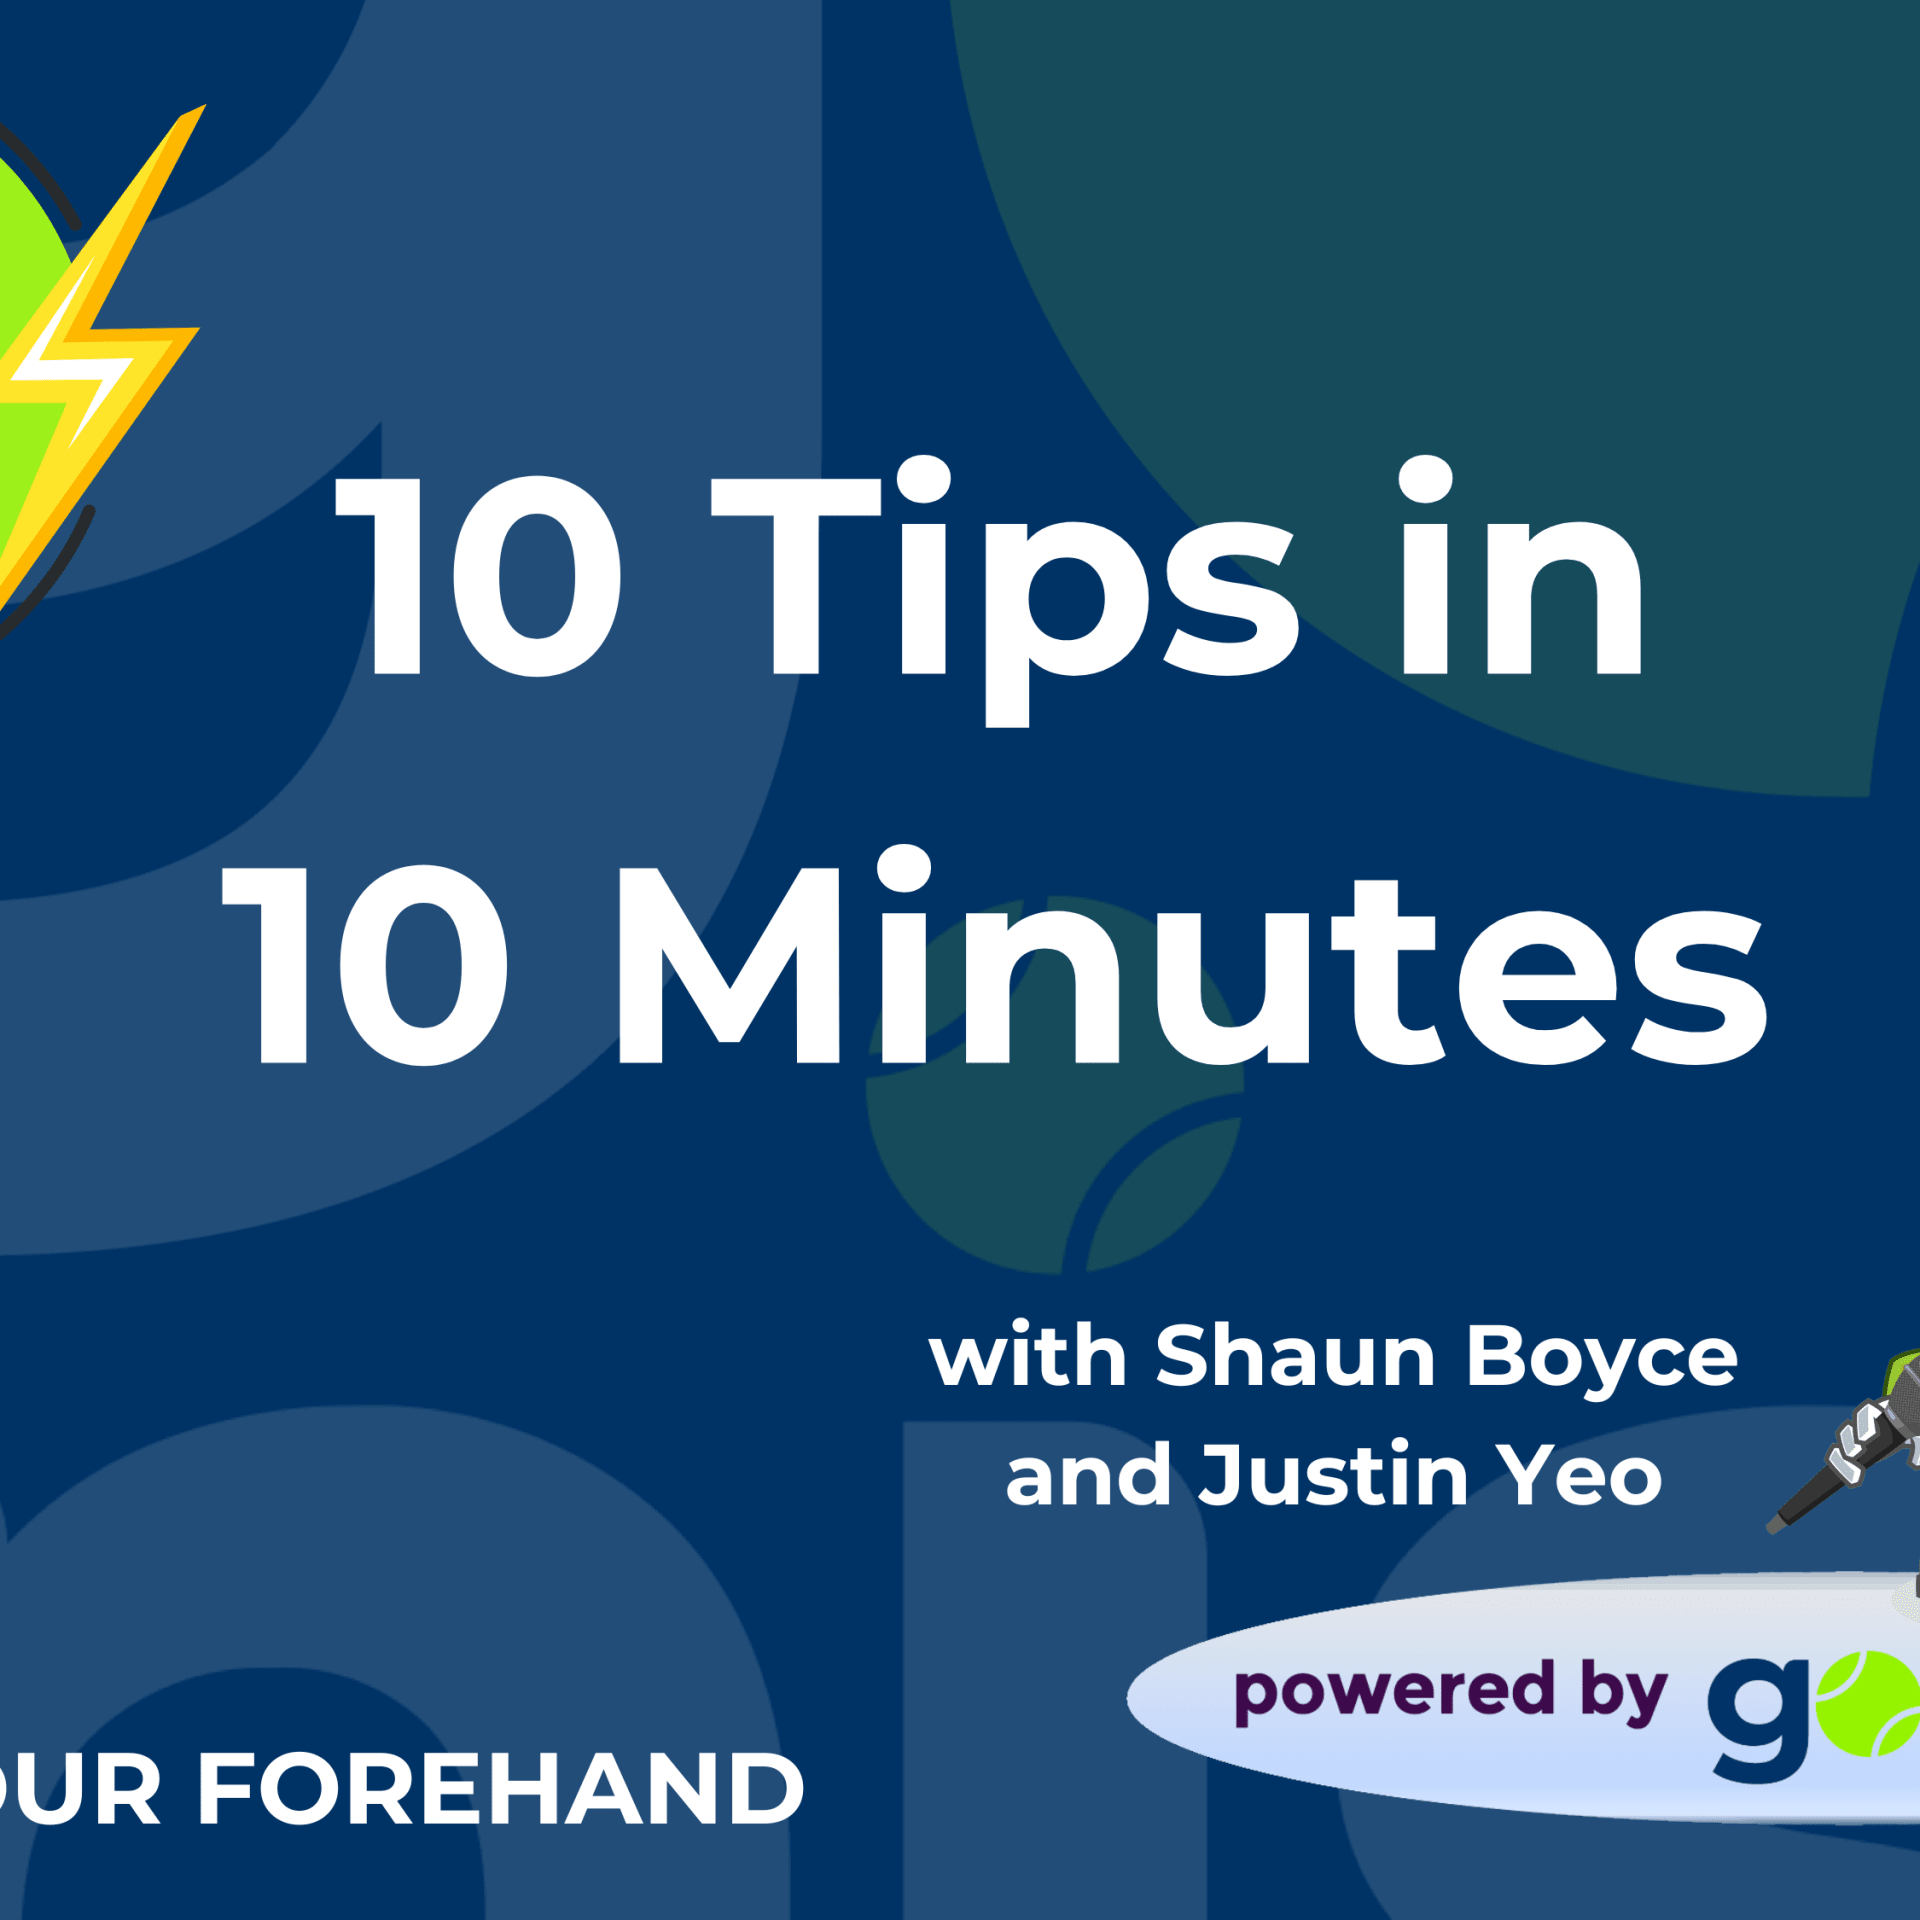 10 Minutes of Tennis: 10 Tips in 10 Minutes: FOREHAND